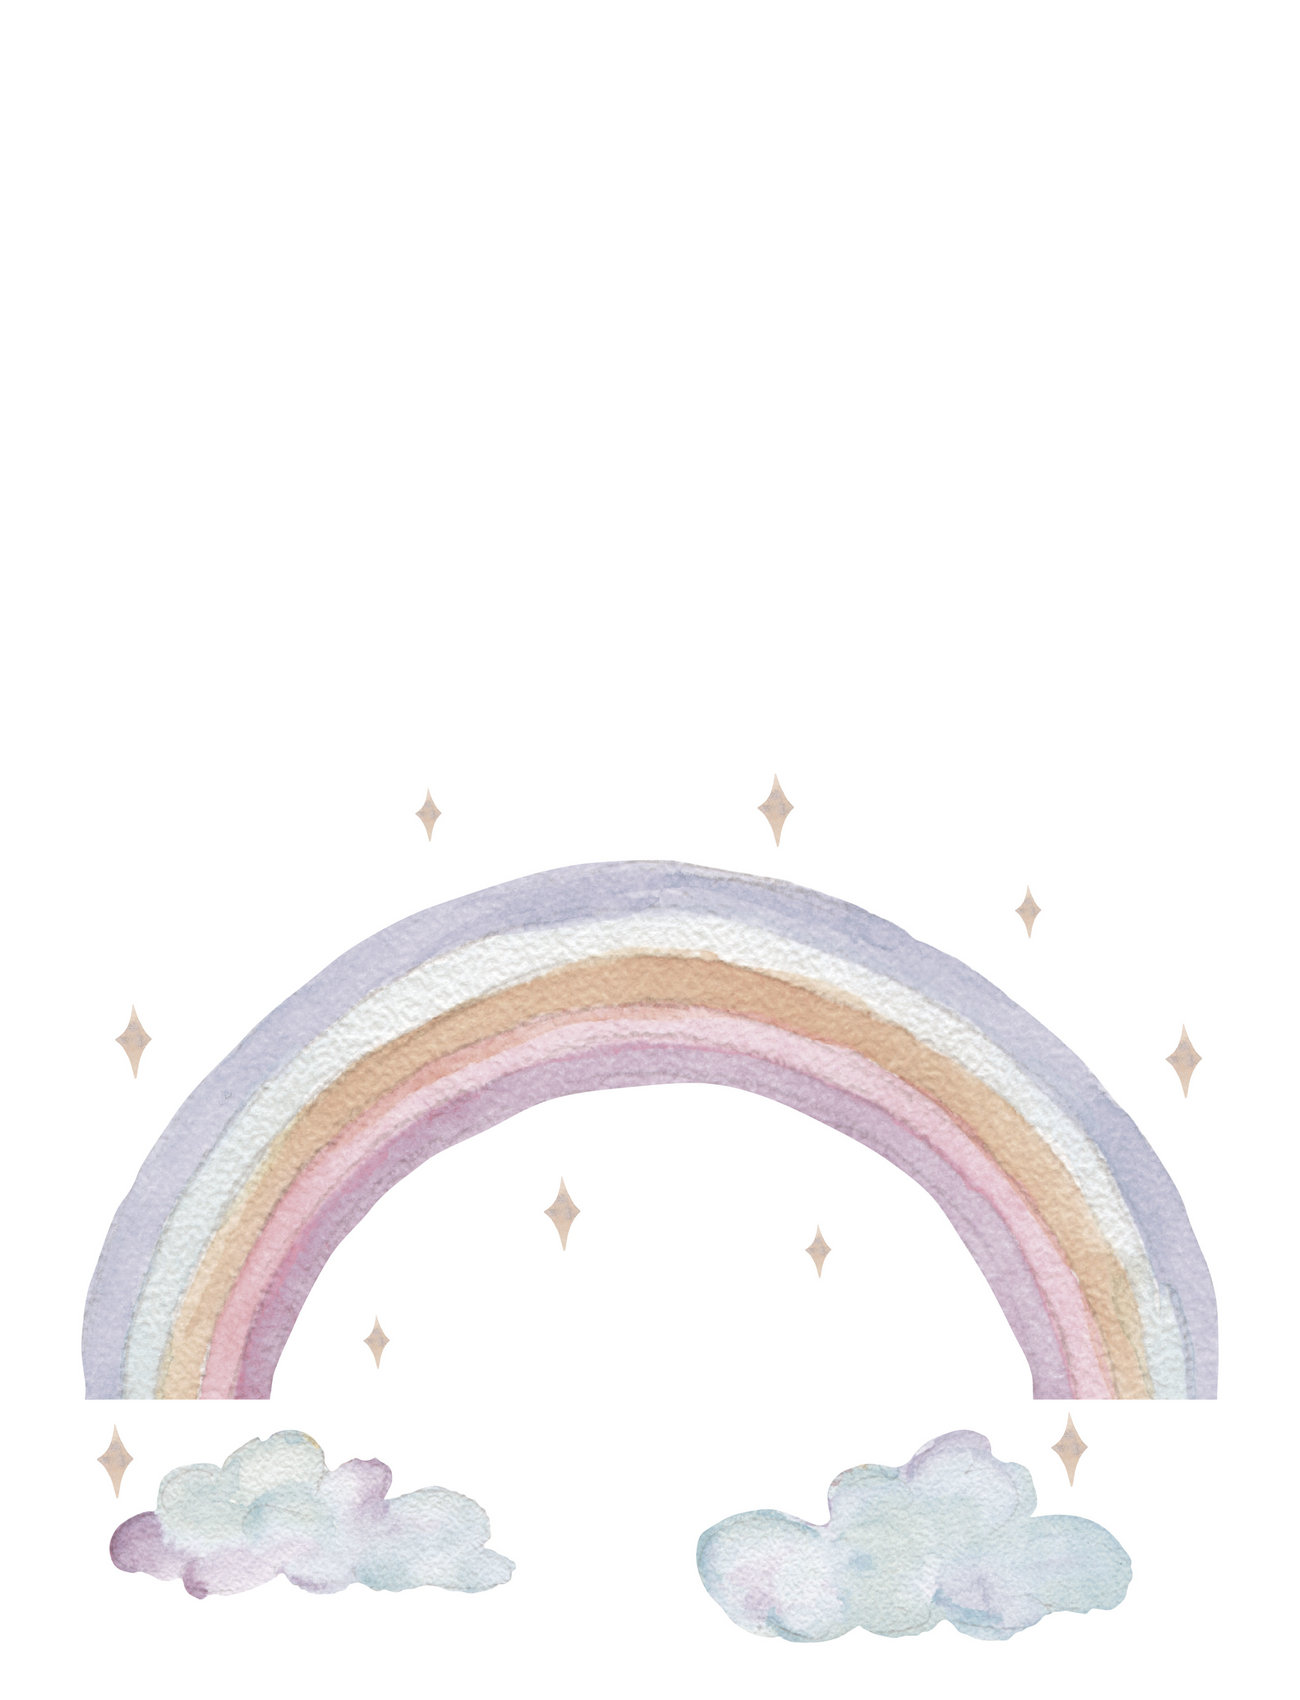 Wall Sticker Fairy Rainbow Home Kids Decor Wall Stickers Nature Multi/patterned That's Mine